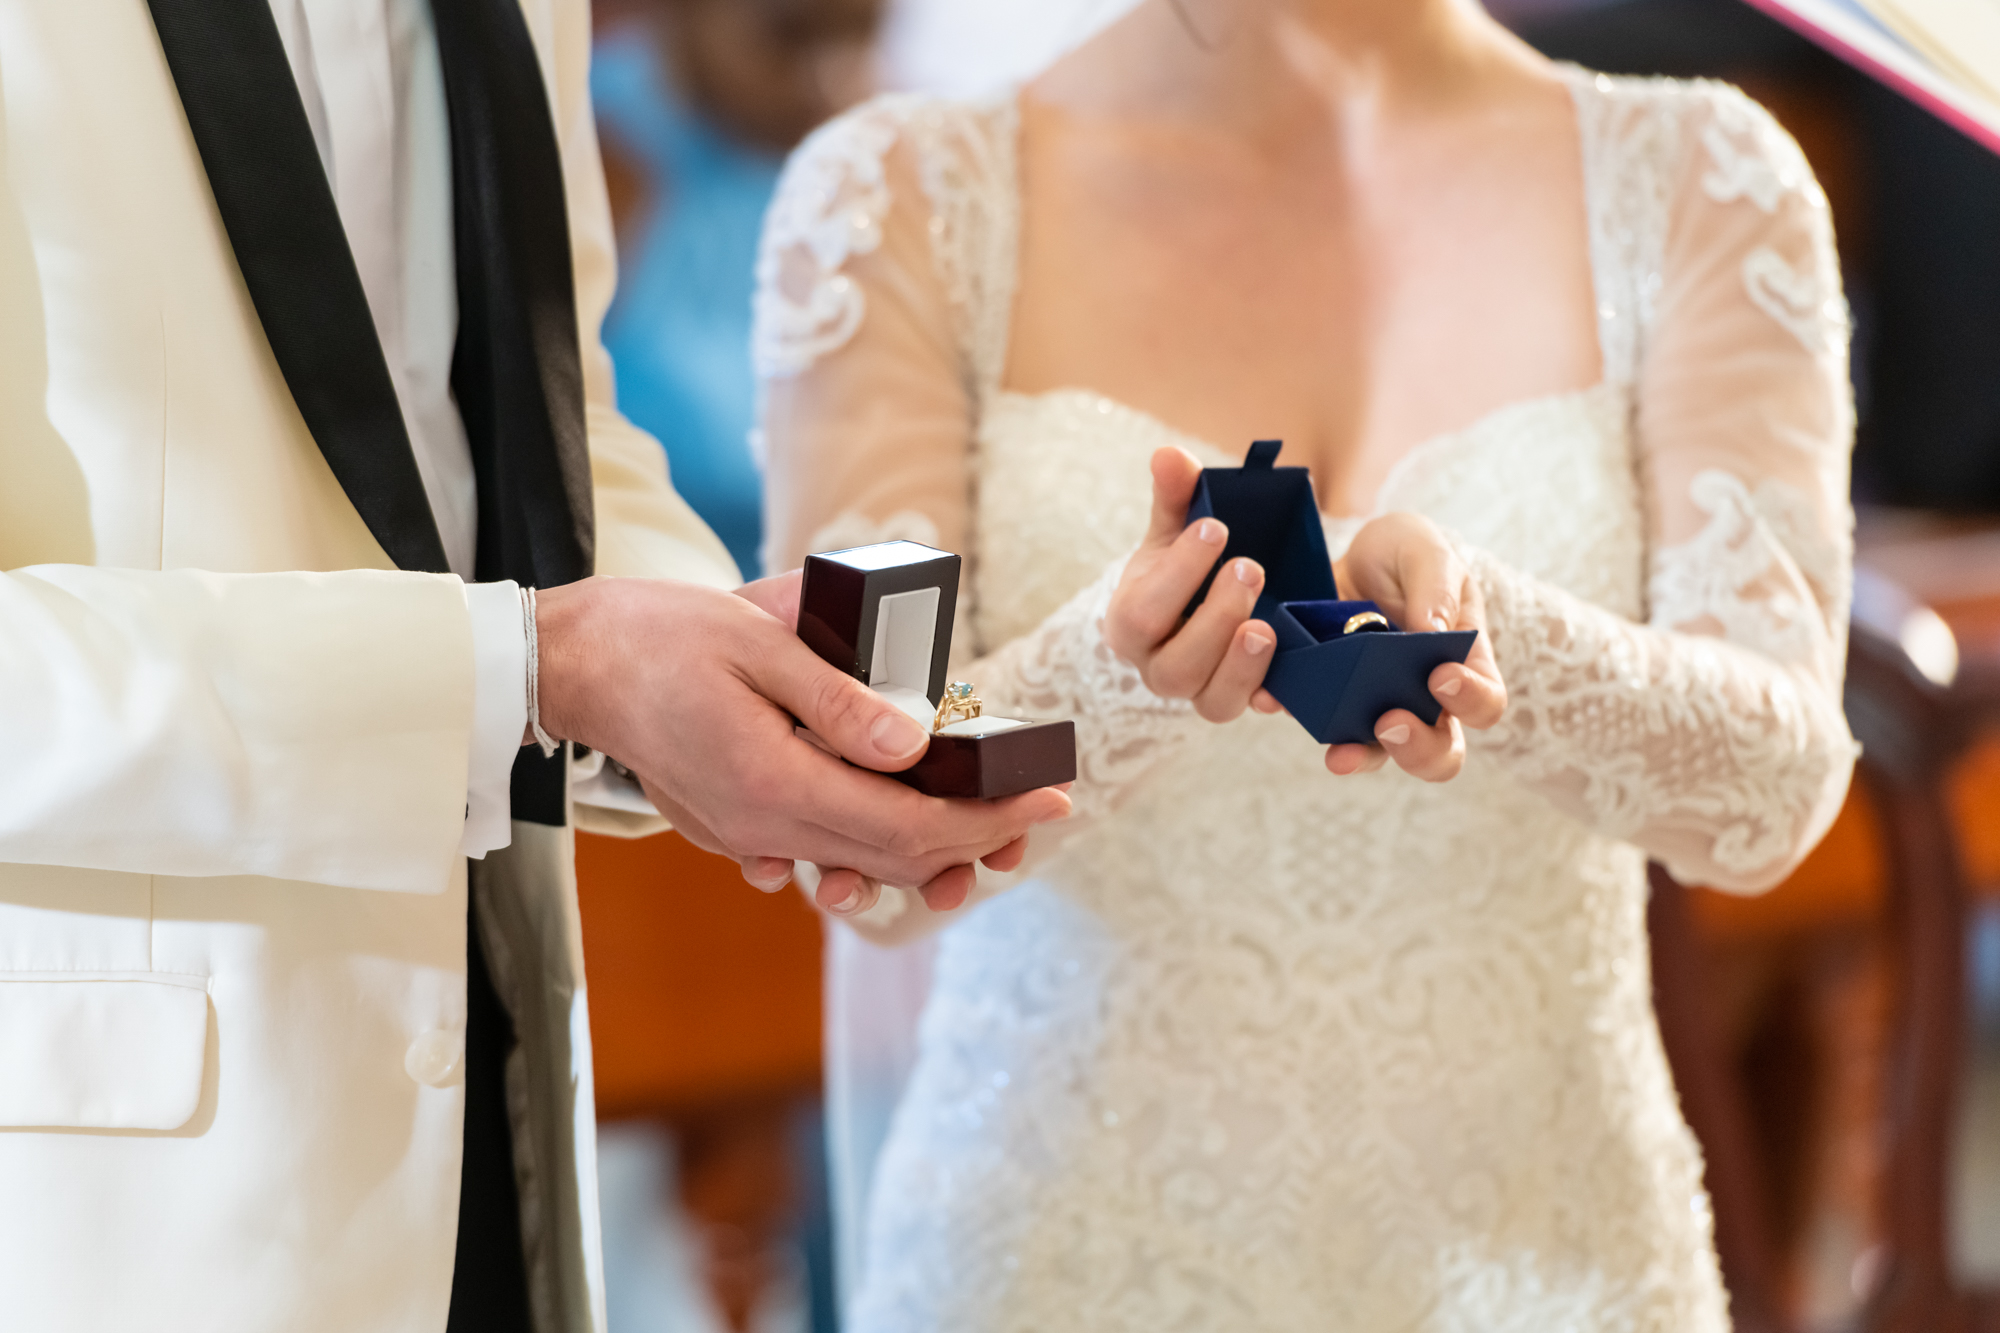 Bride and groom holding the wedding rings